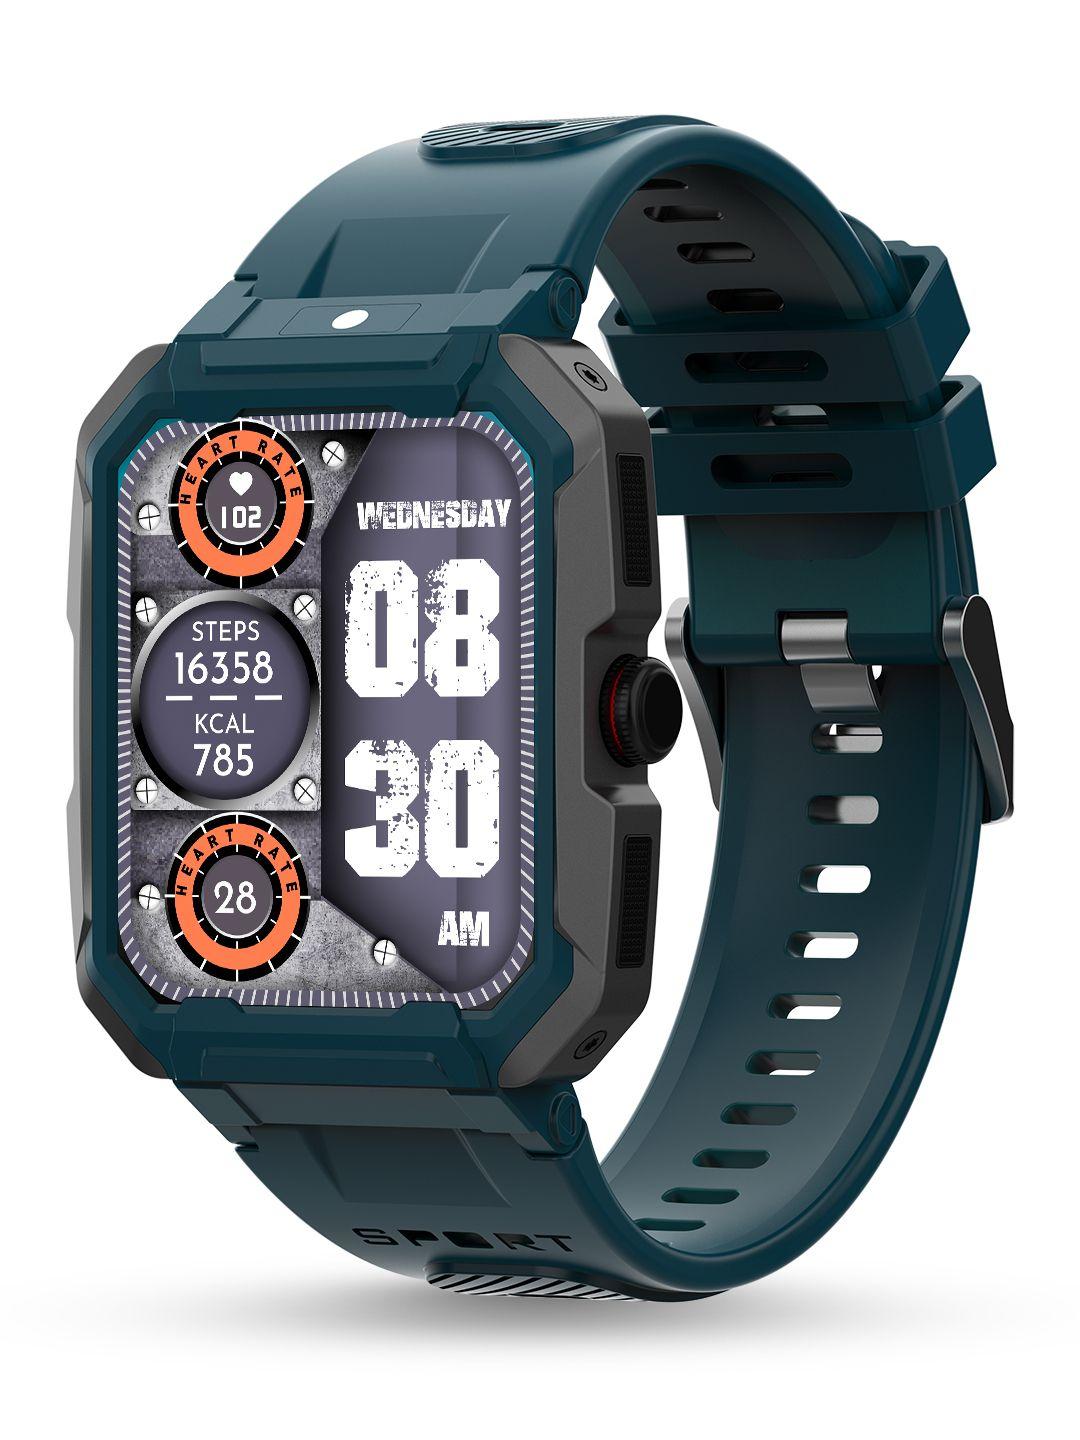 pebble dare hd display rugged design smartwatch with rotating crown